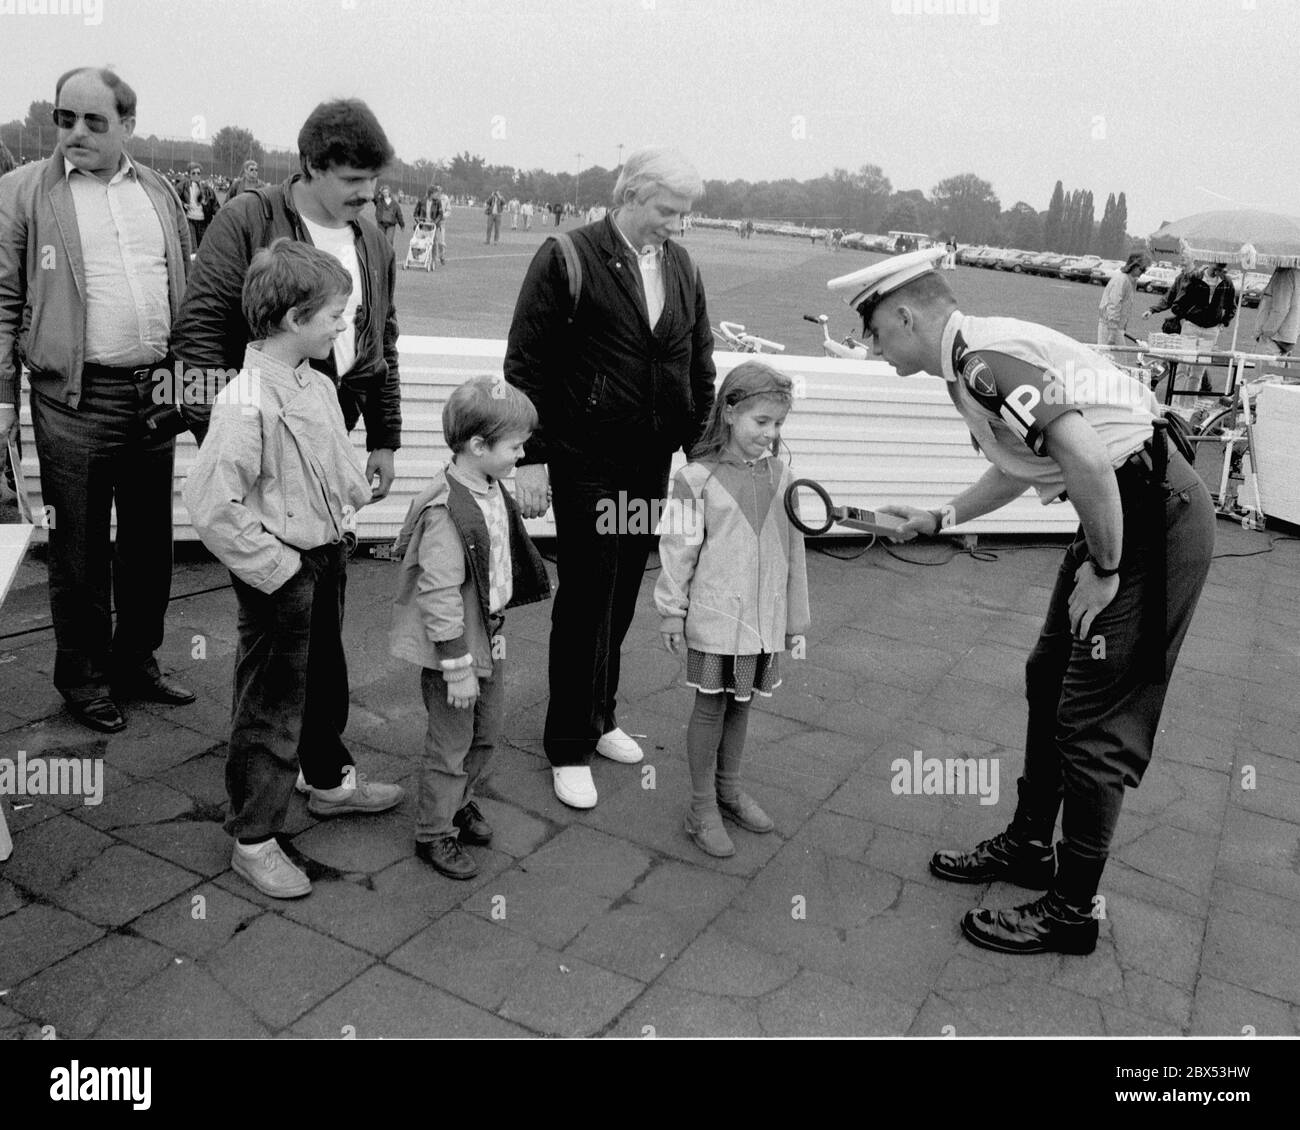 Berlin-Bezirke / Status / 12.5.1987 Open Day at Tempelhof Airport, which is a military airport of the American occupying power. Children and anything dangerous is scanned by the military police at the entrance // western allies / military / USA / [automated translation] Stock Photo